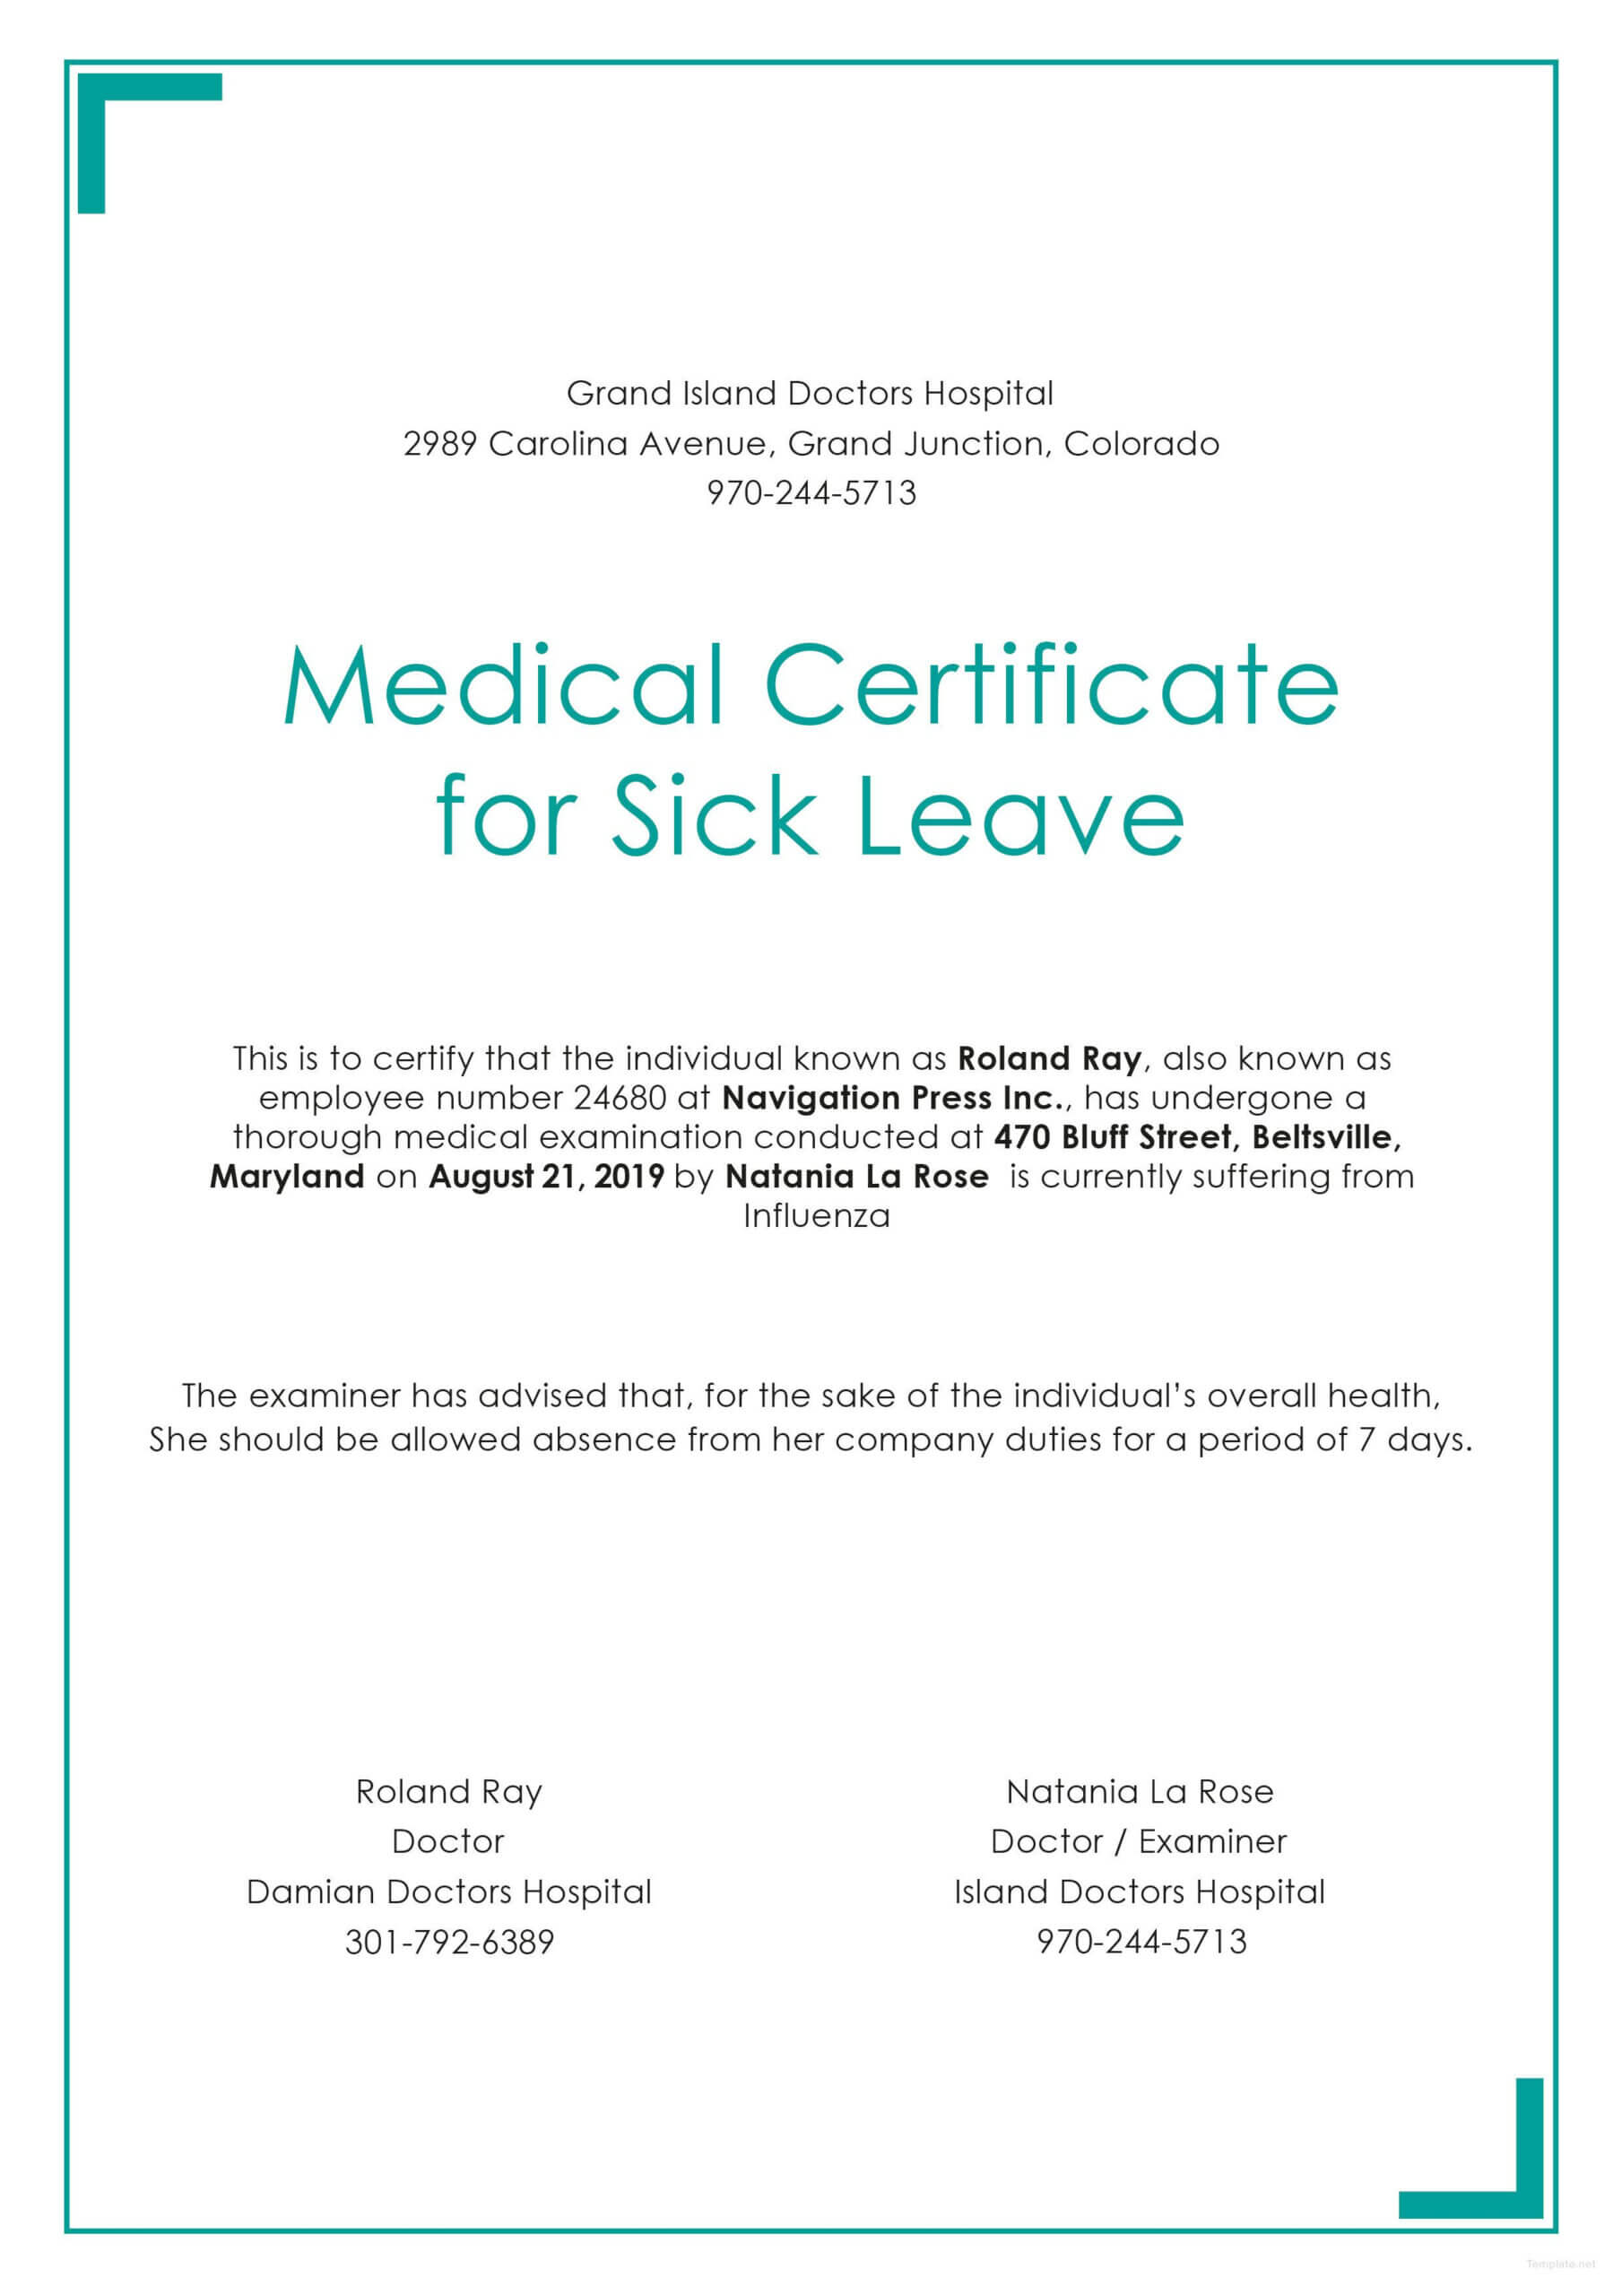 Free Medical Certificate For Sick Leave | Medical Within Certificate Of Appearance Template